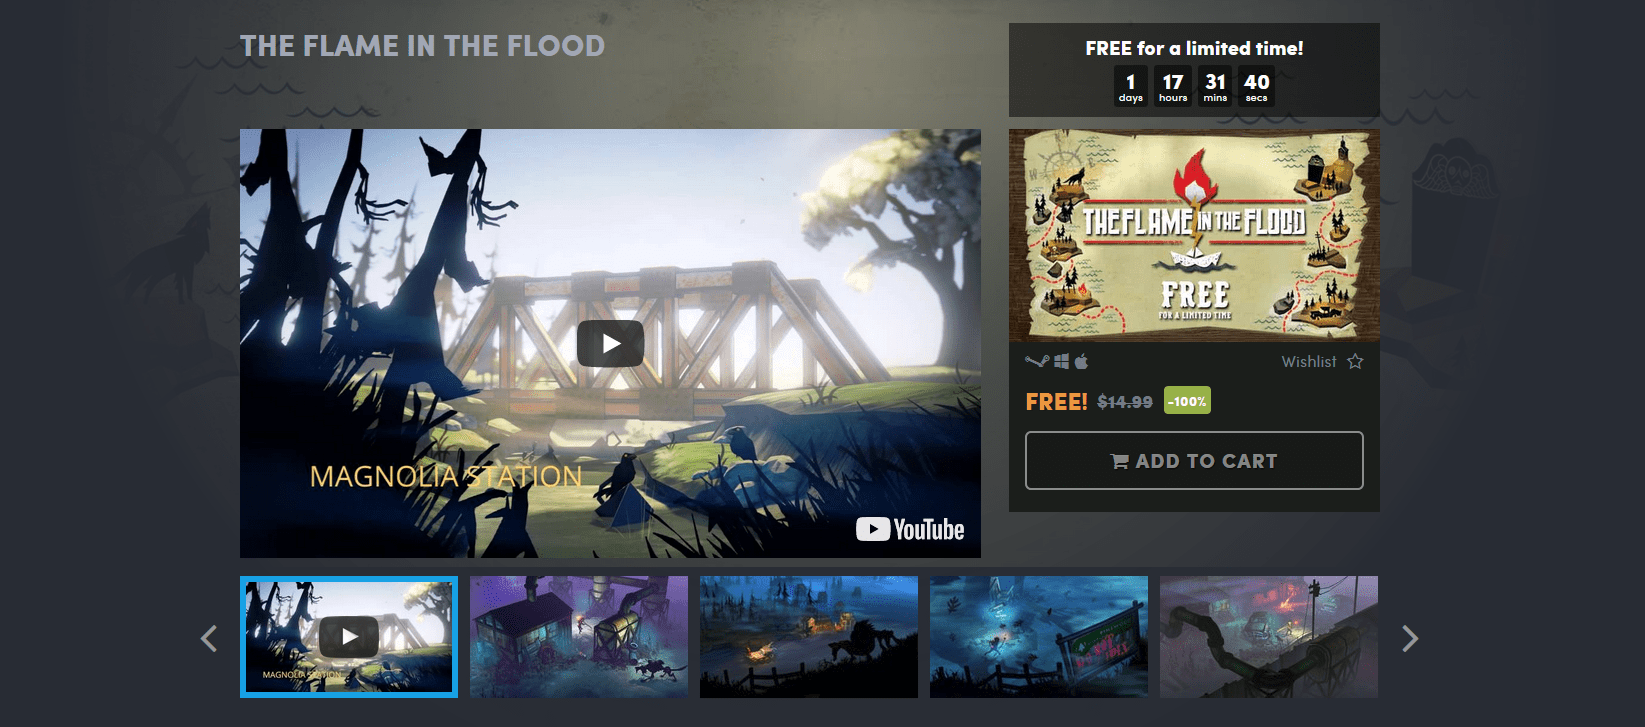 The Flame in the Flood is Free on Humble Bundle